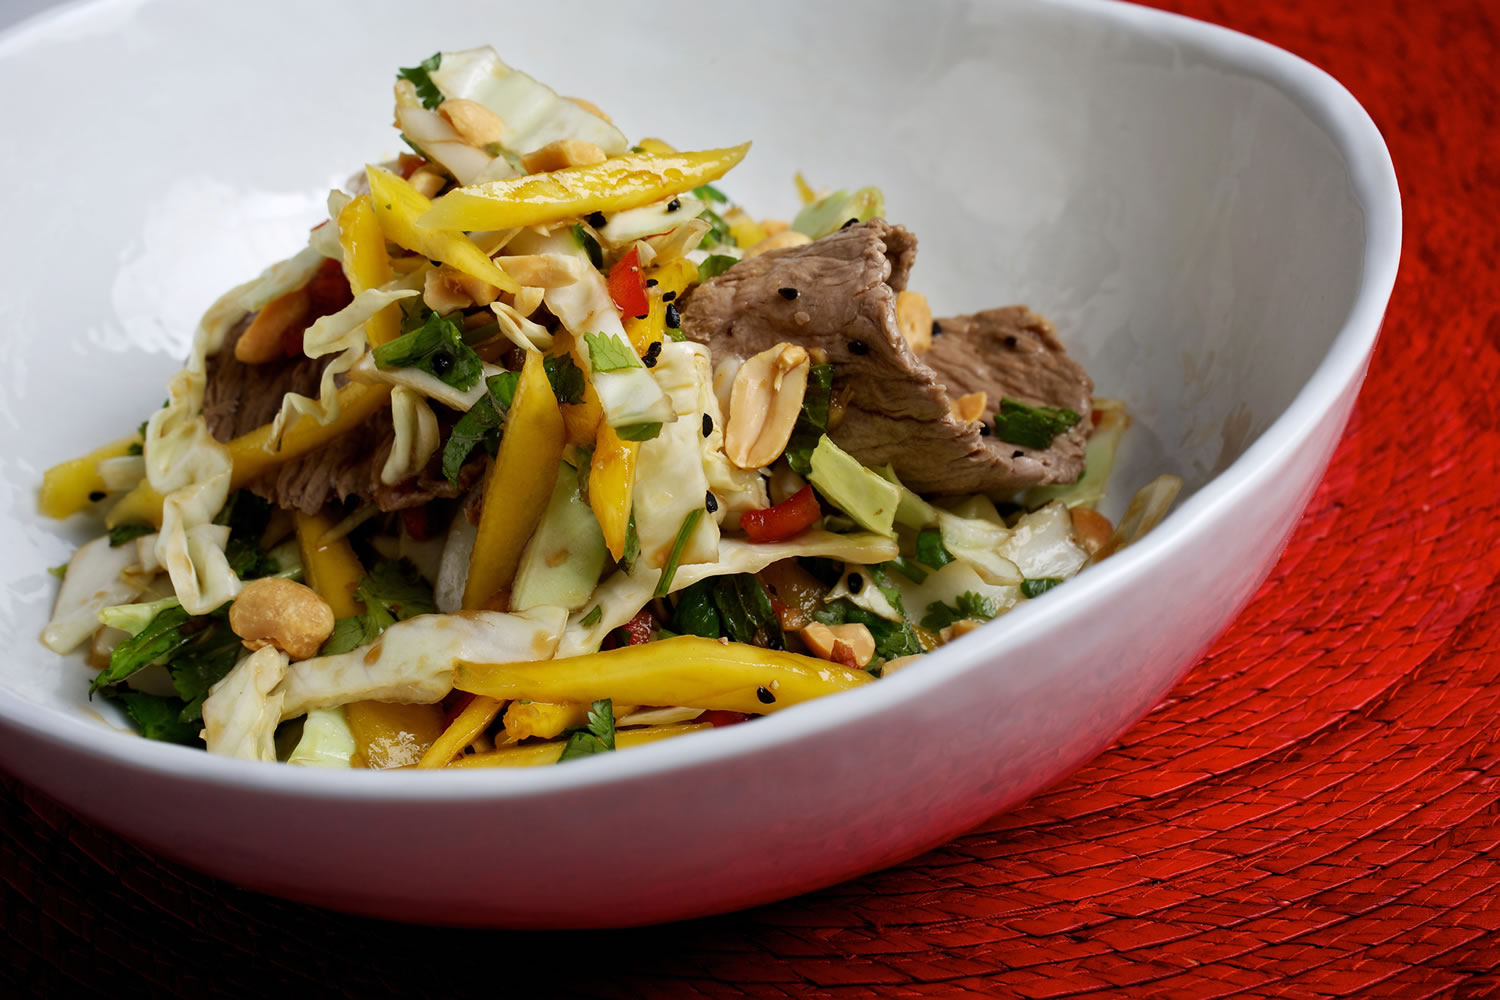 Lime Beef Salad is a chef's take on a crunchy, tangy, savory salad.